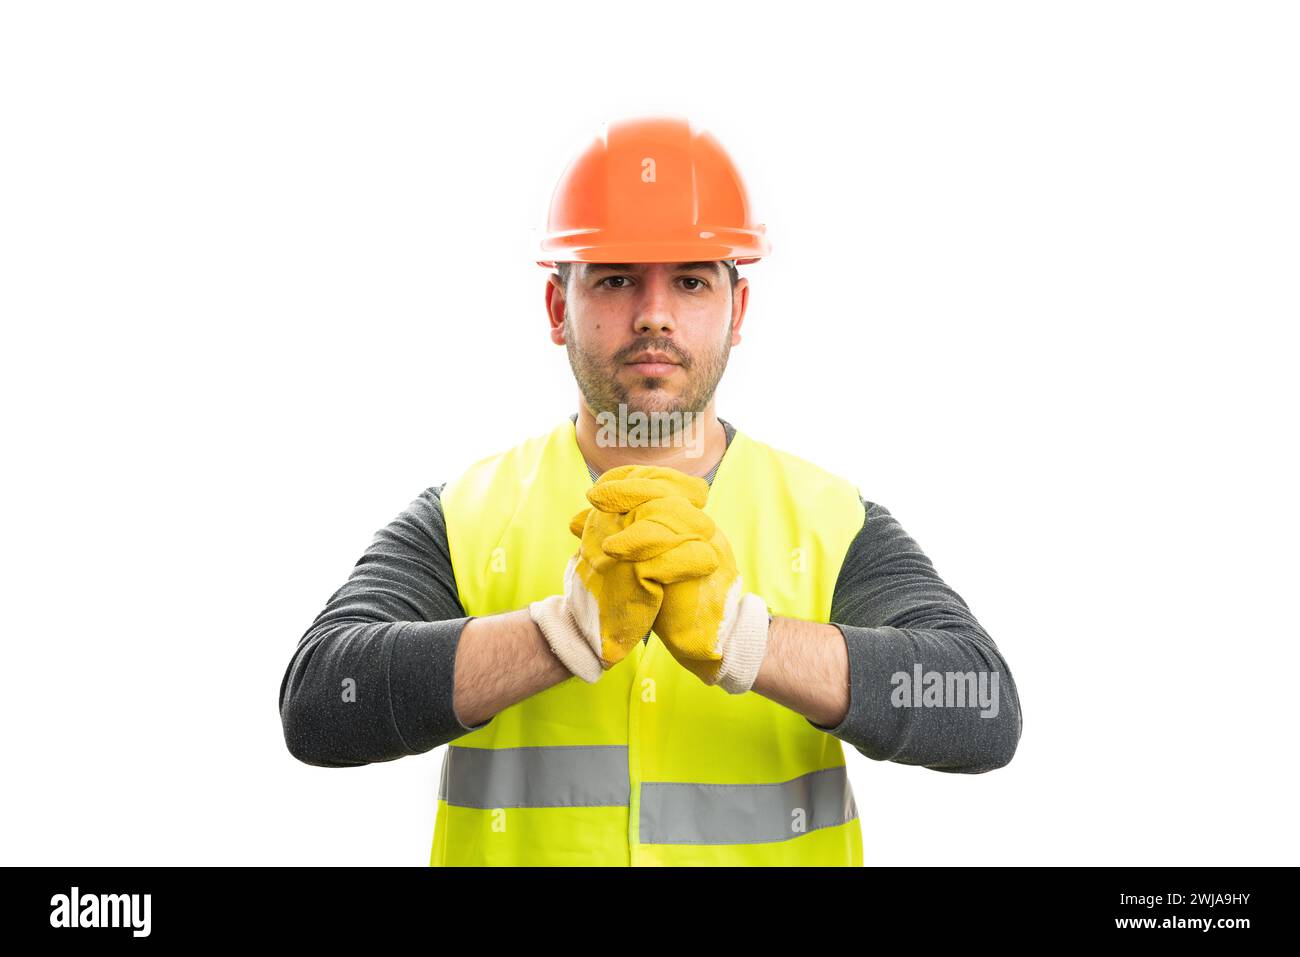 Serious expression male builder wearing trades industry work safety equipment orange helmet and fluorescent vest with yellow gloves isolated on white Stock Photo